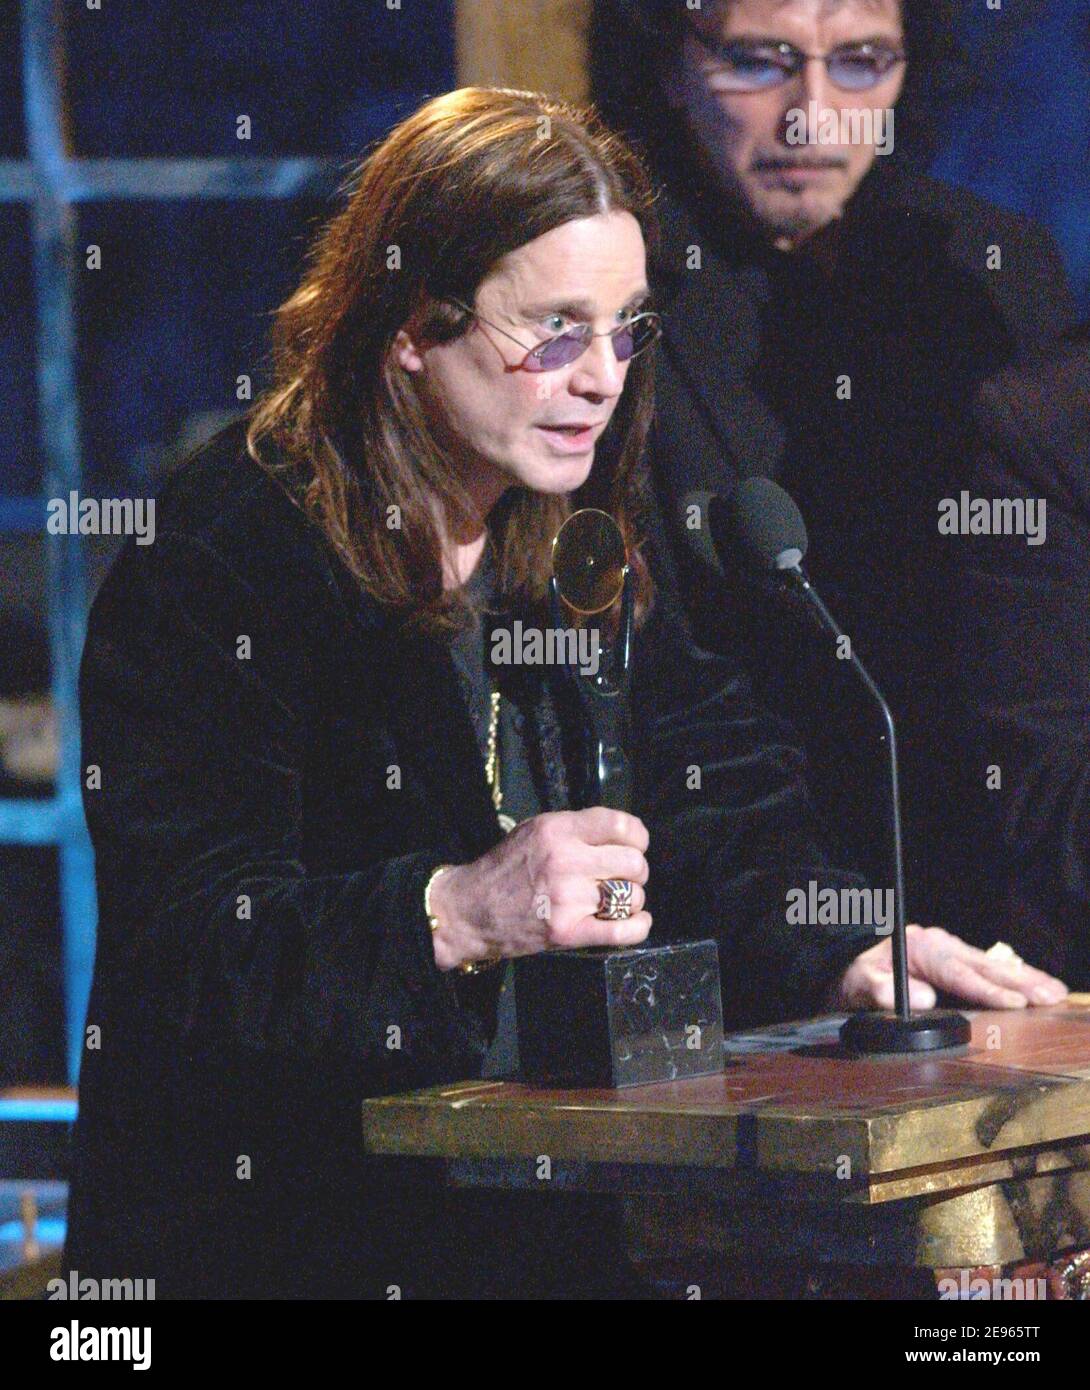 Indcutees Ozzy Osbourne and his band Black Sabbath at the 21st Annual Rock & Roll Hall of Fame Induction Dinner held at the Waldorf Astoria in New York, NY, USA on March 13, 2006. Photo by Nicolas Khayat/ABACAPRESS.COM Stock Photo